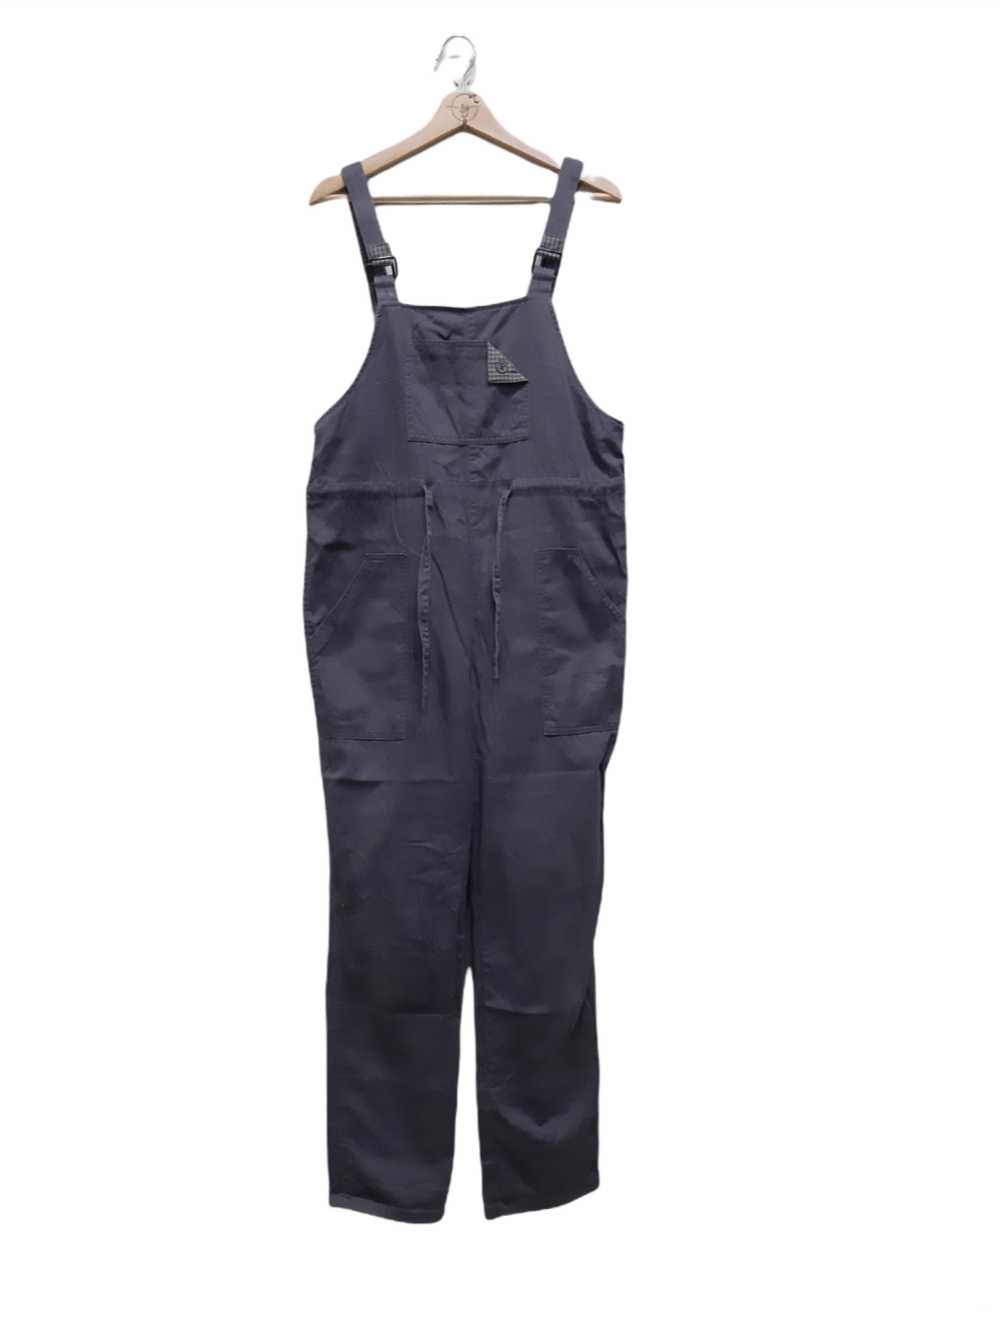 Japanese Brand × Overalls Vintage Overall Japan - image 2